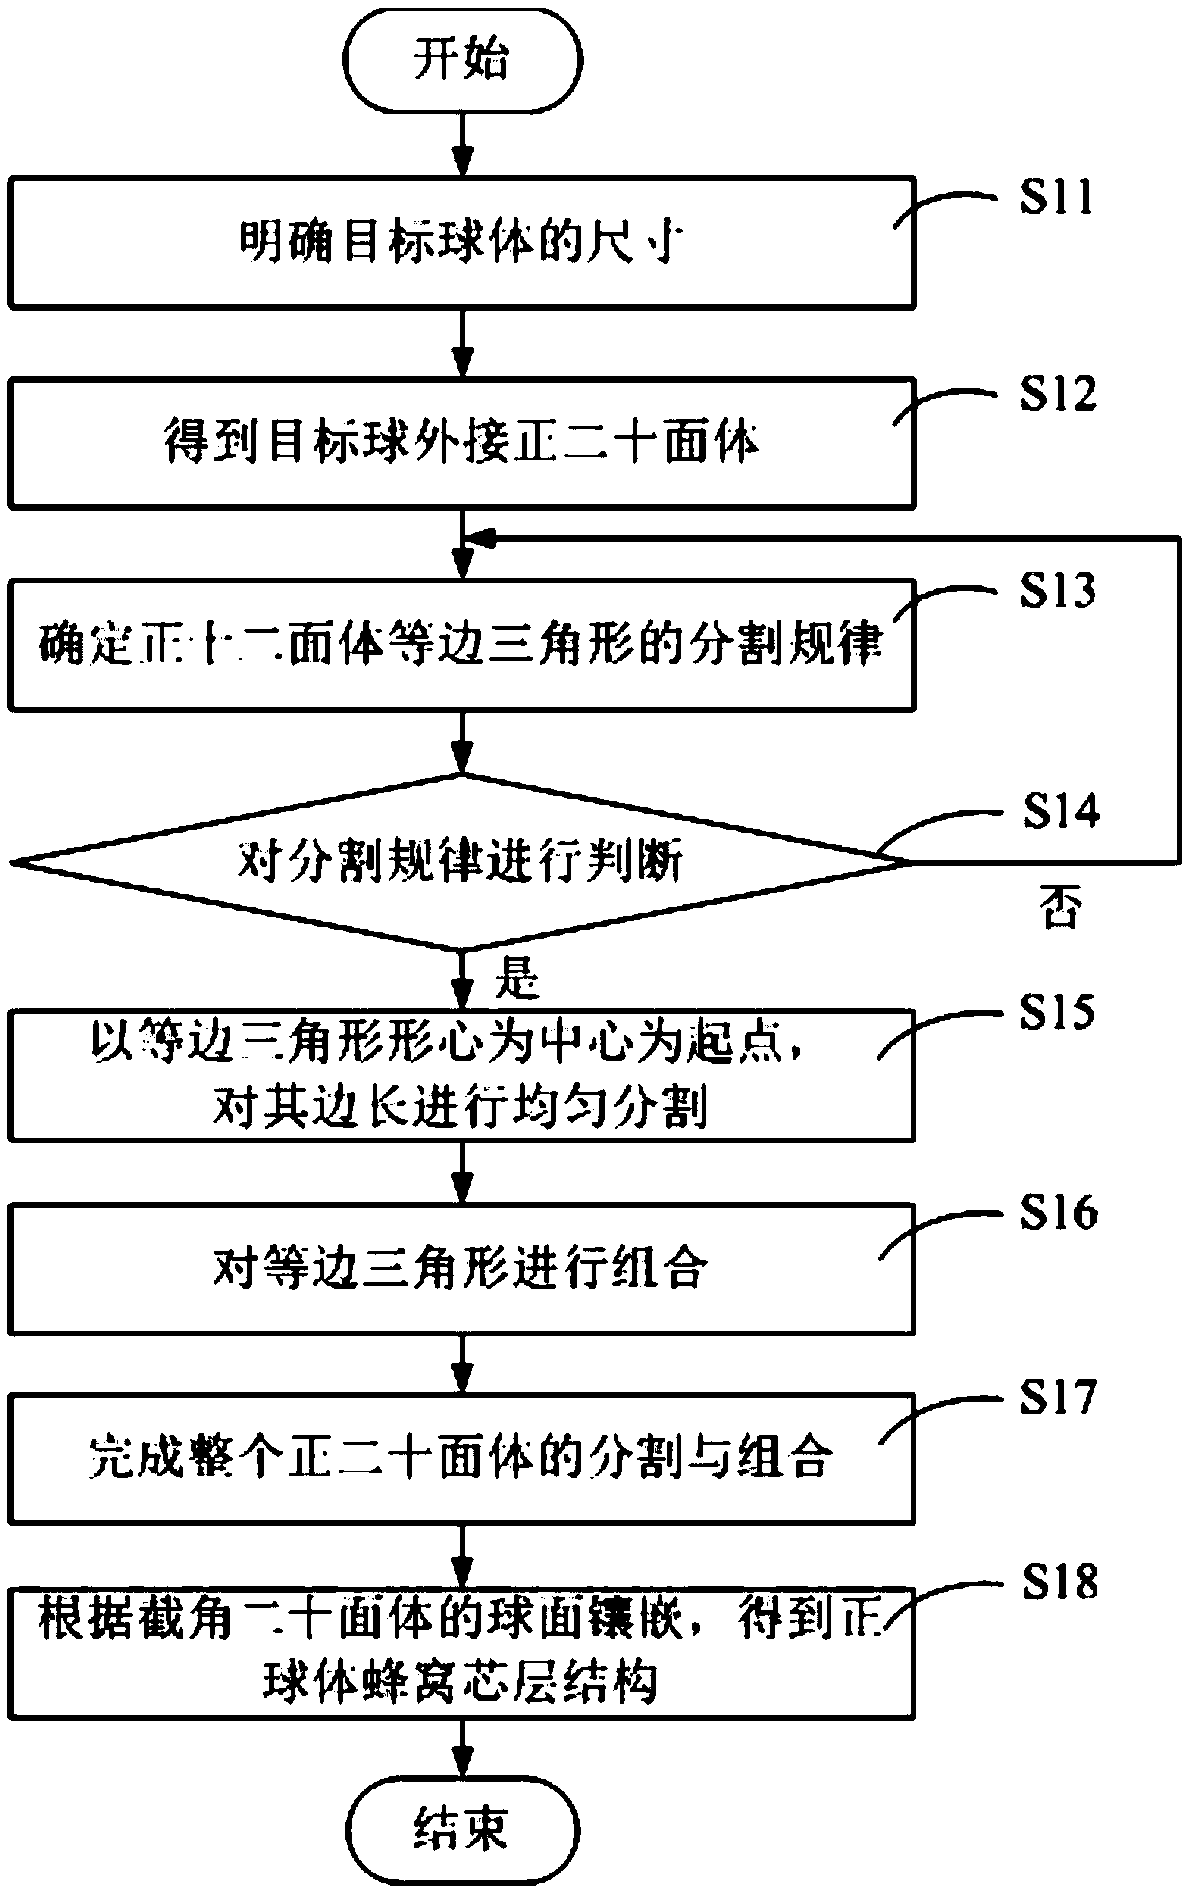 Honeycomb core structure design method for spherical robot cushioning shell